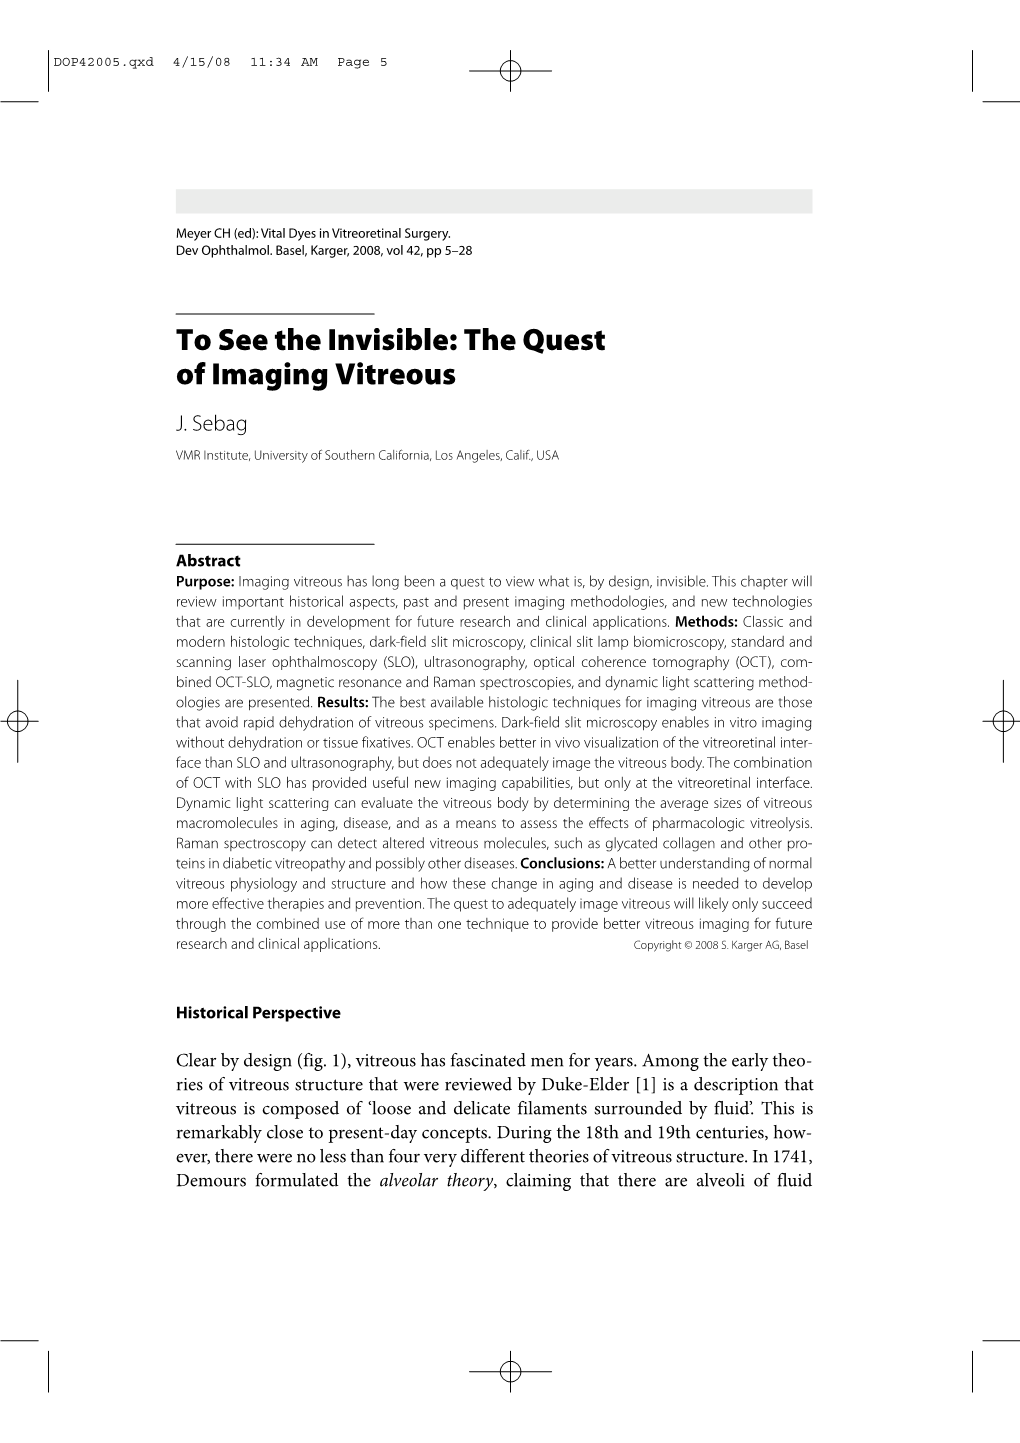 To See the Invisible: the Quest of Imaging Vitreous J